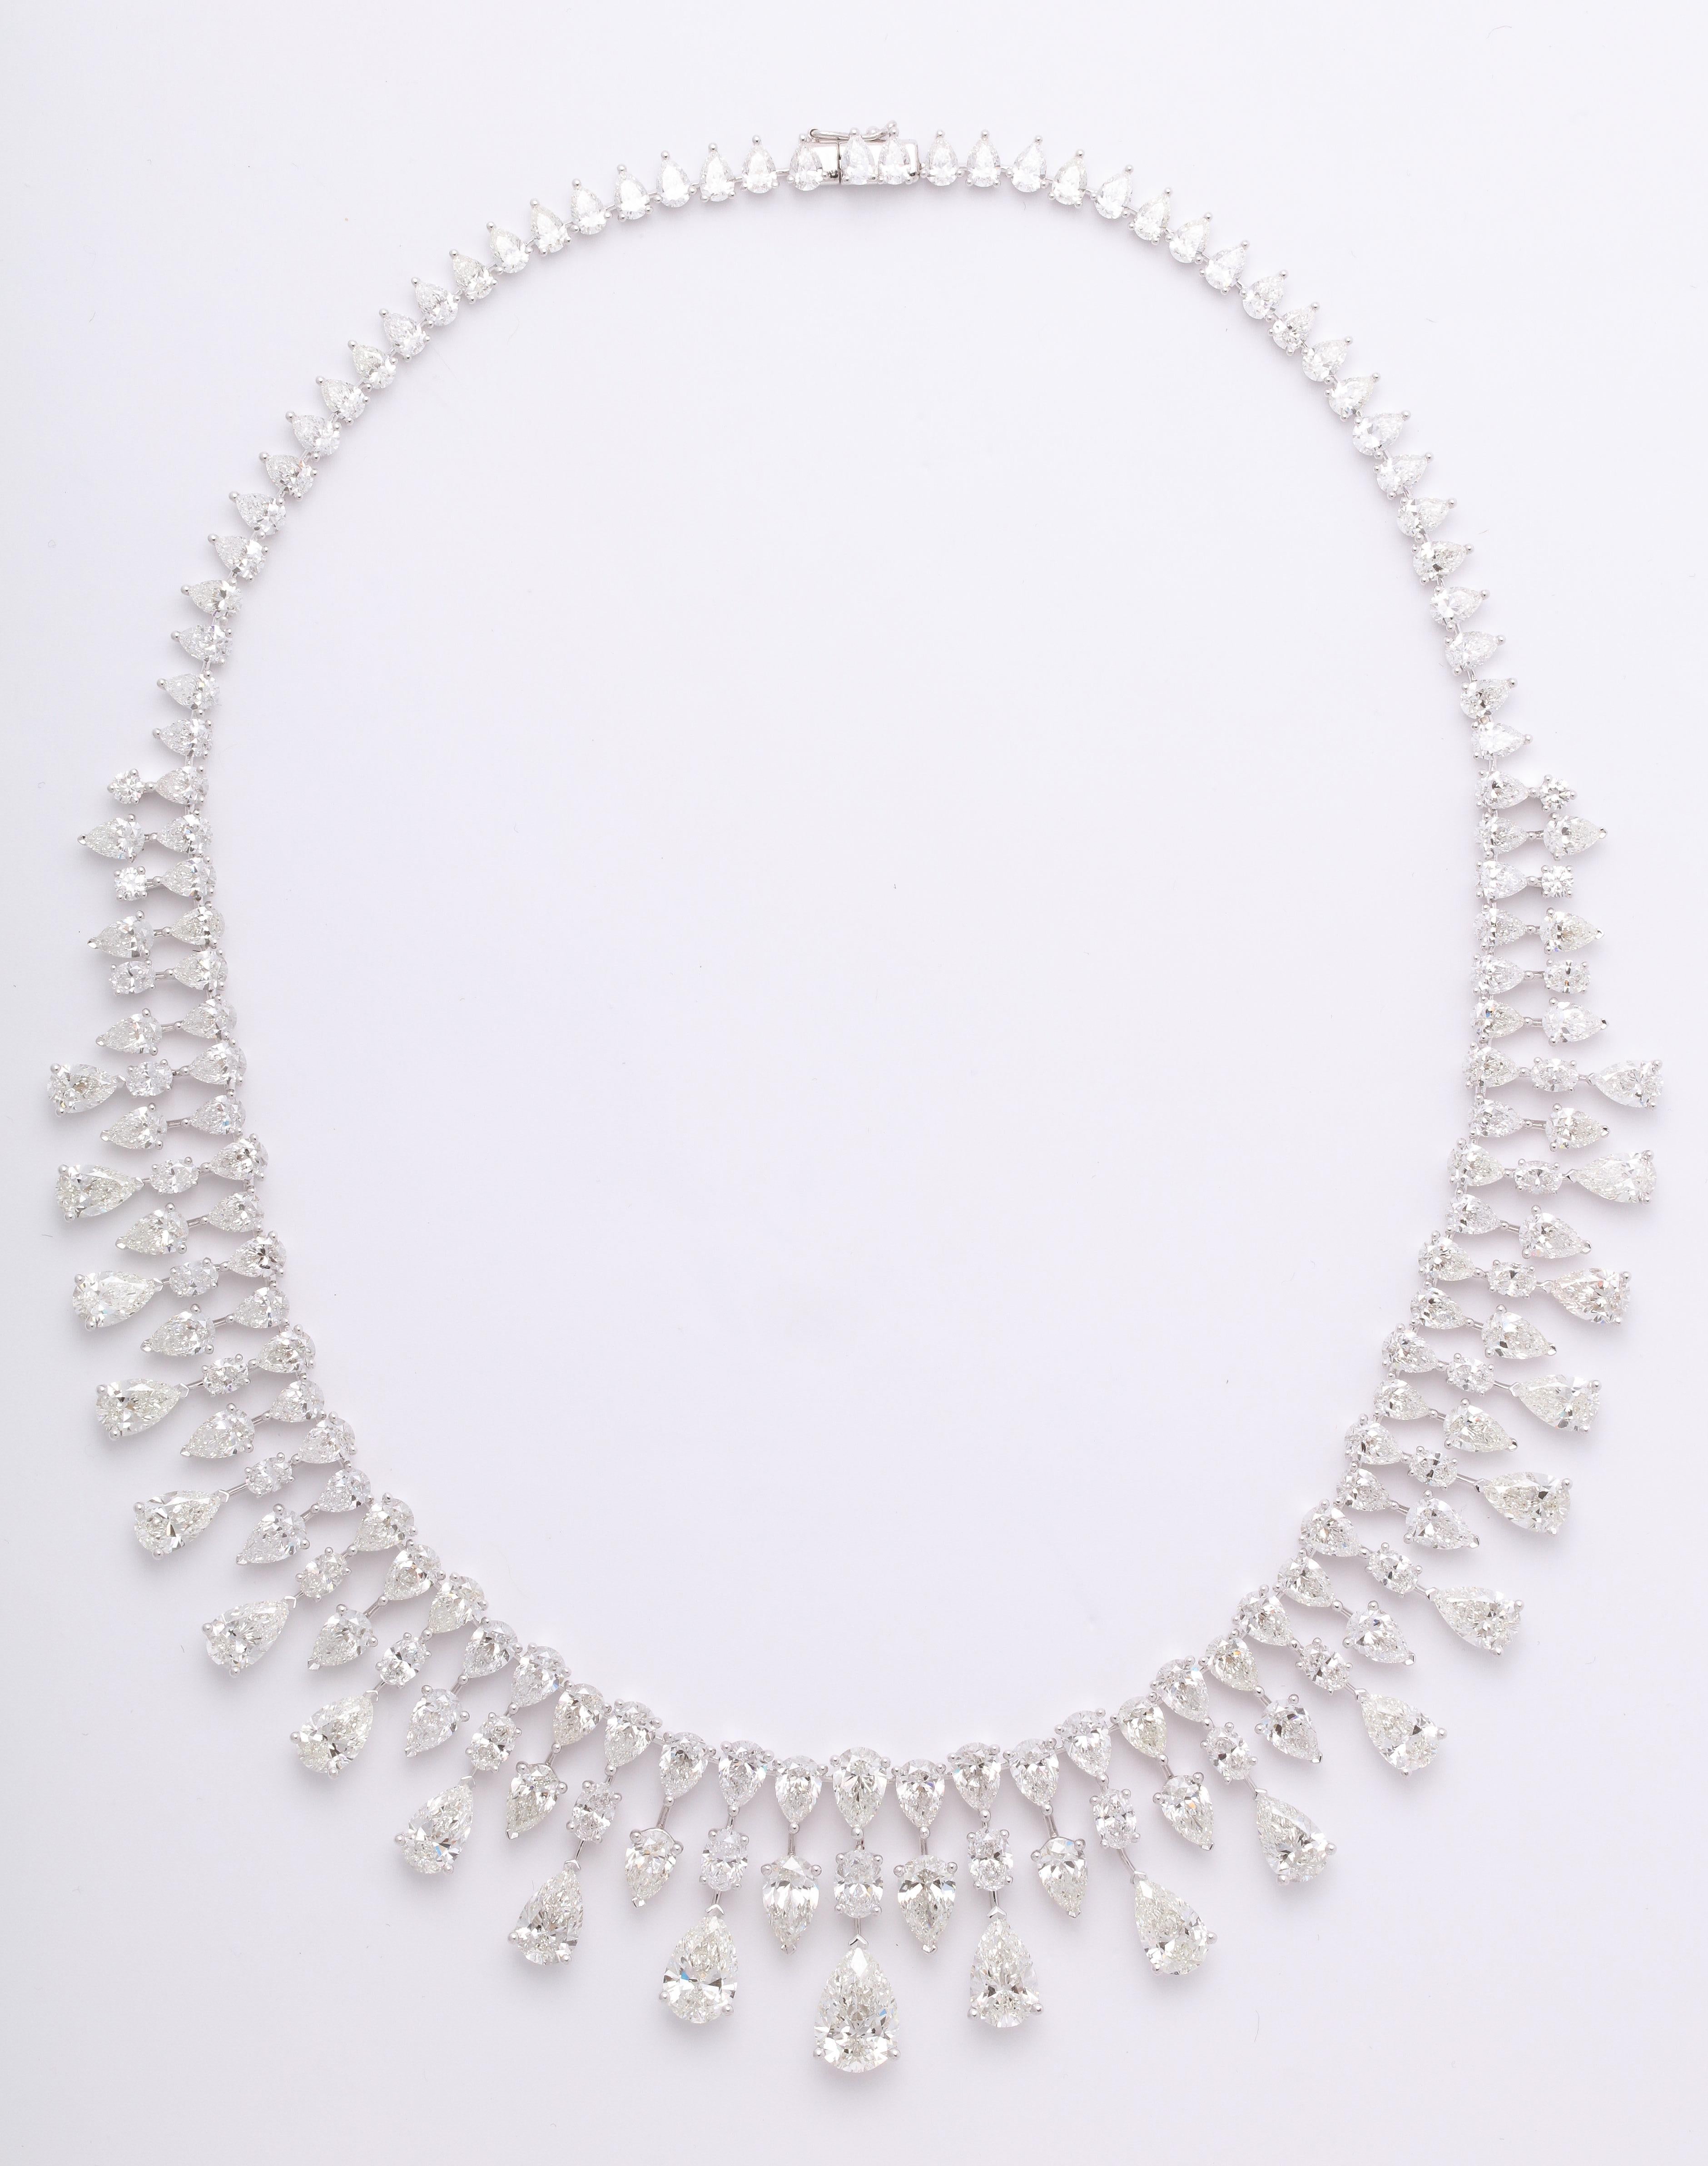 
An important diamond drop necklace.

72.96 carats of pear shape and oval diamonds set in 18k white gold.

Approximately 16.5 inches in length that can be adjusted if necessary. 

Masterly crafted in New York, please contact as for more information.